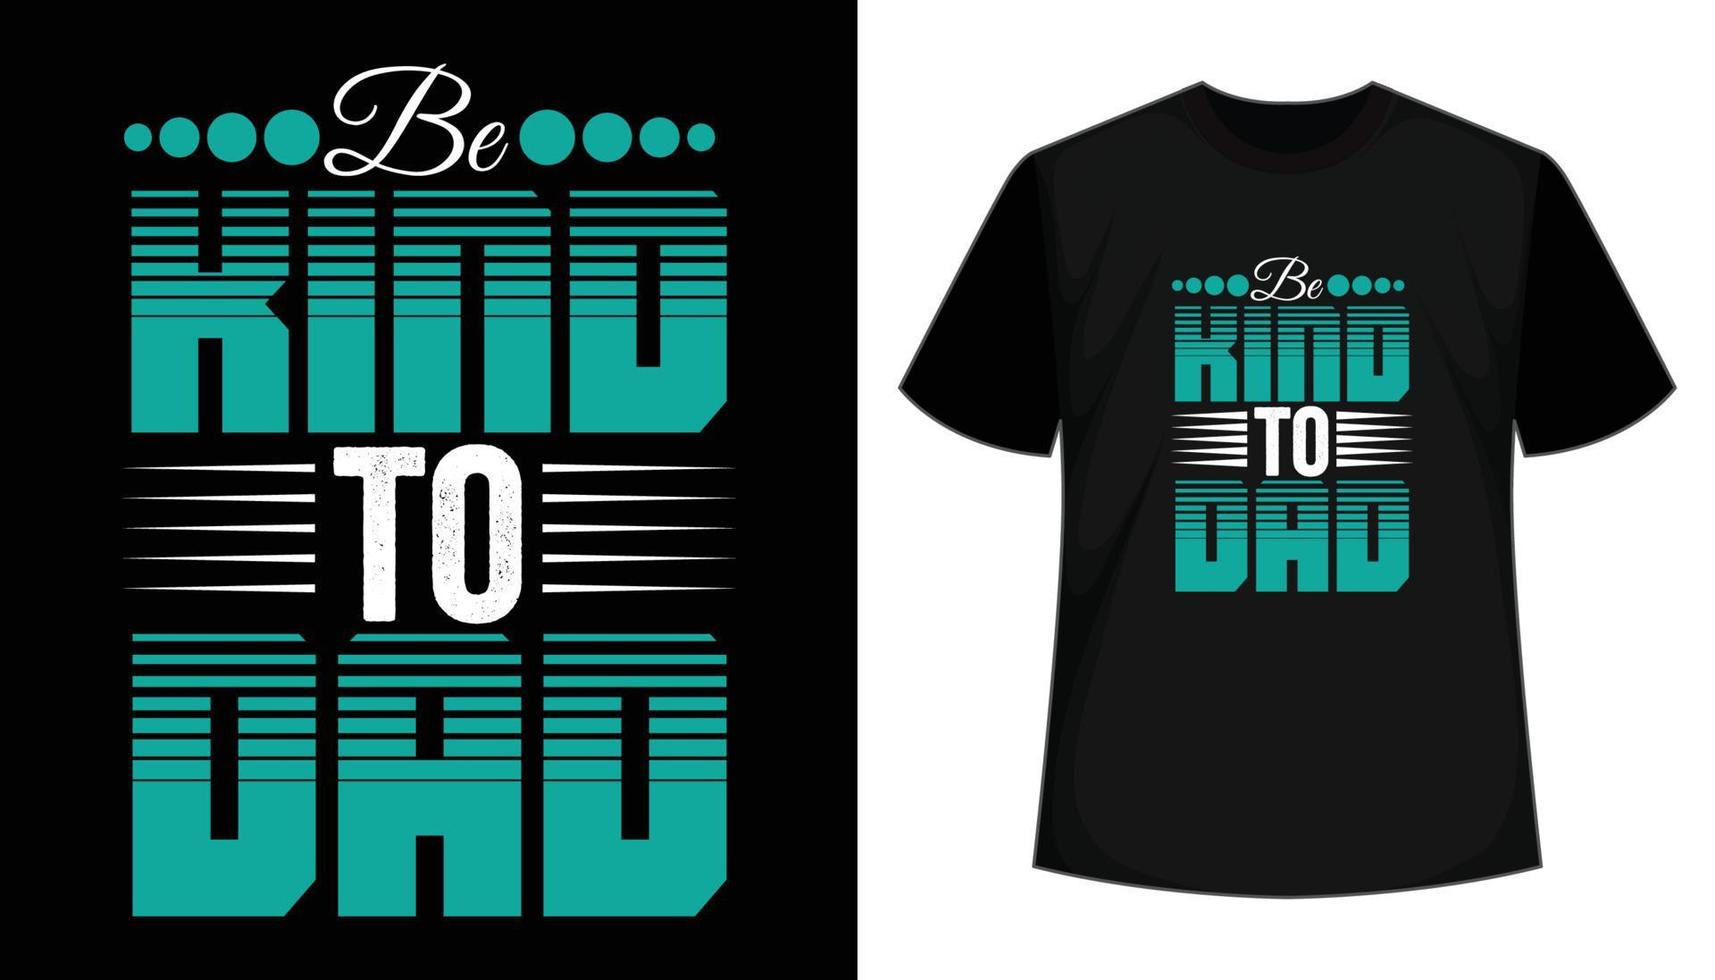 Be kind to dad typography t shirt design. vector illustration